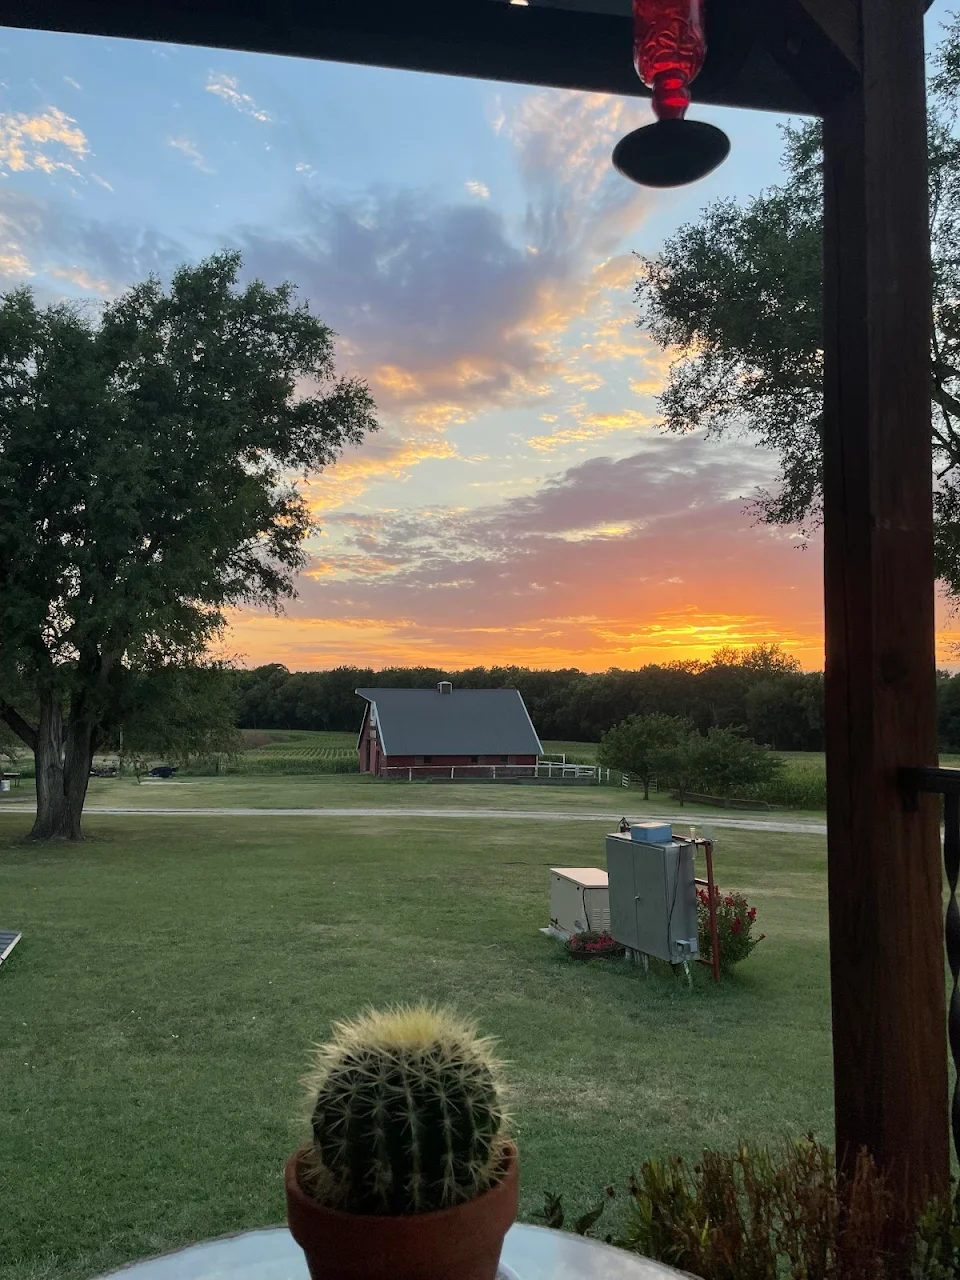 another sunset from my parent’s farm